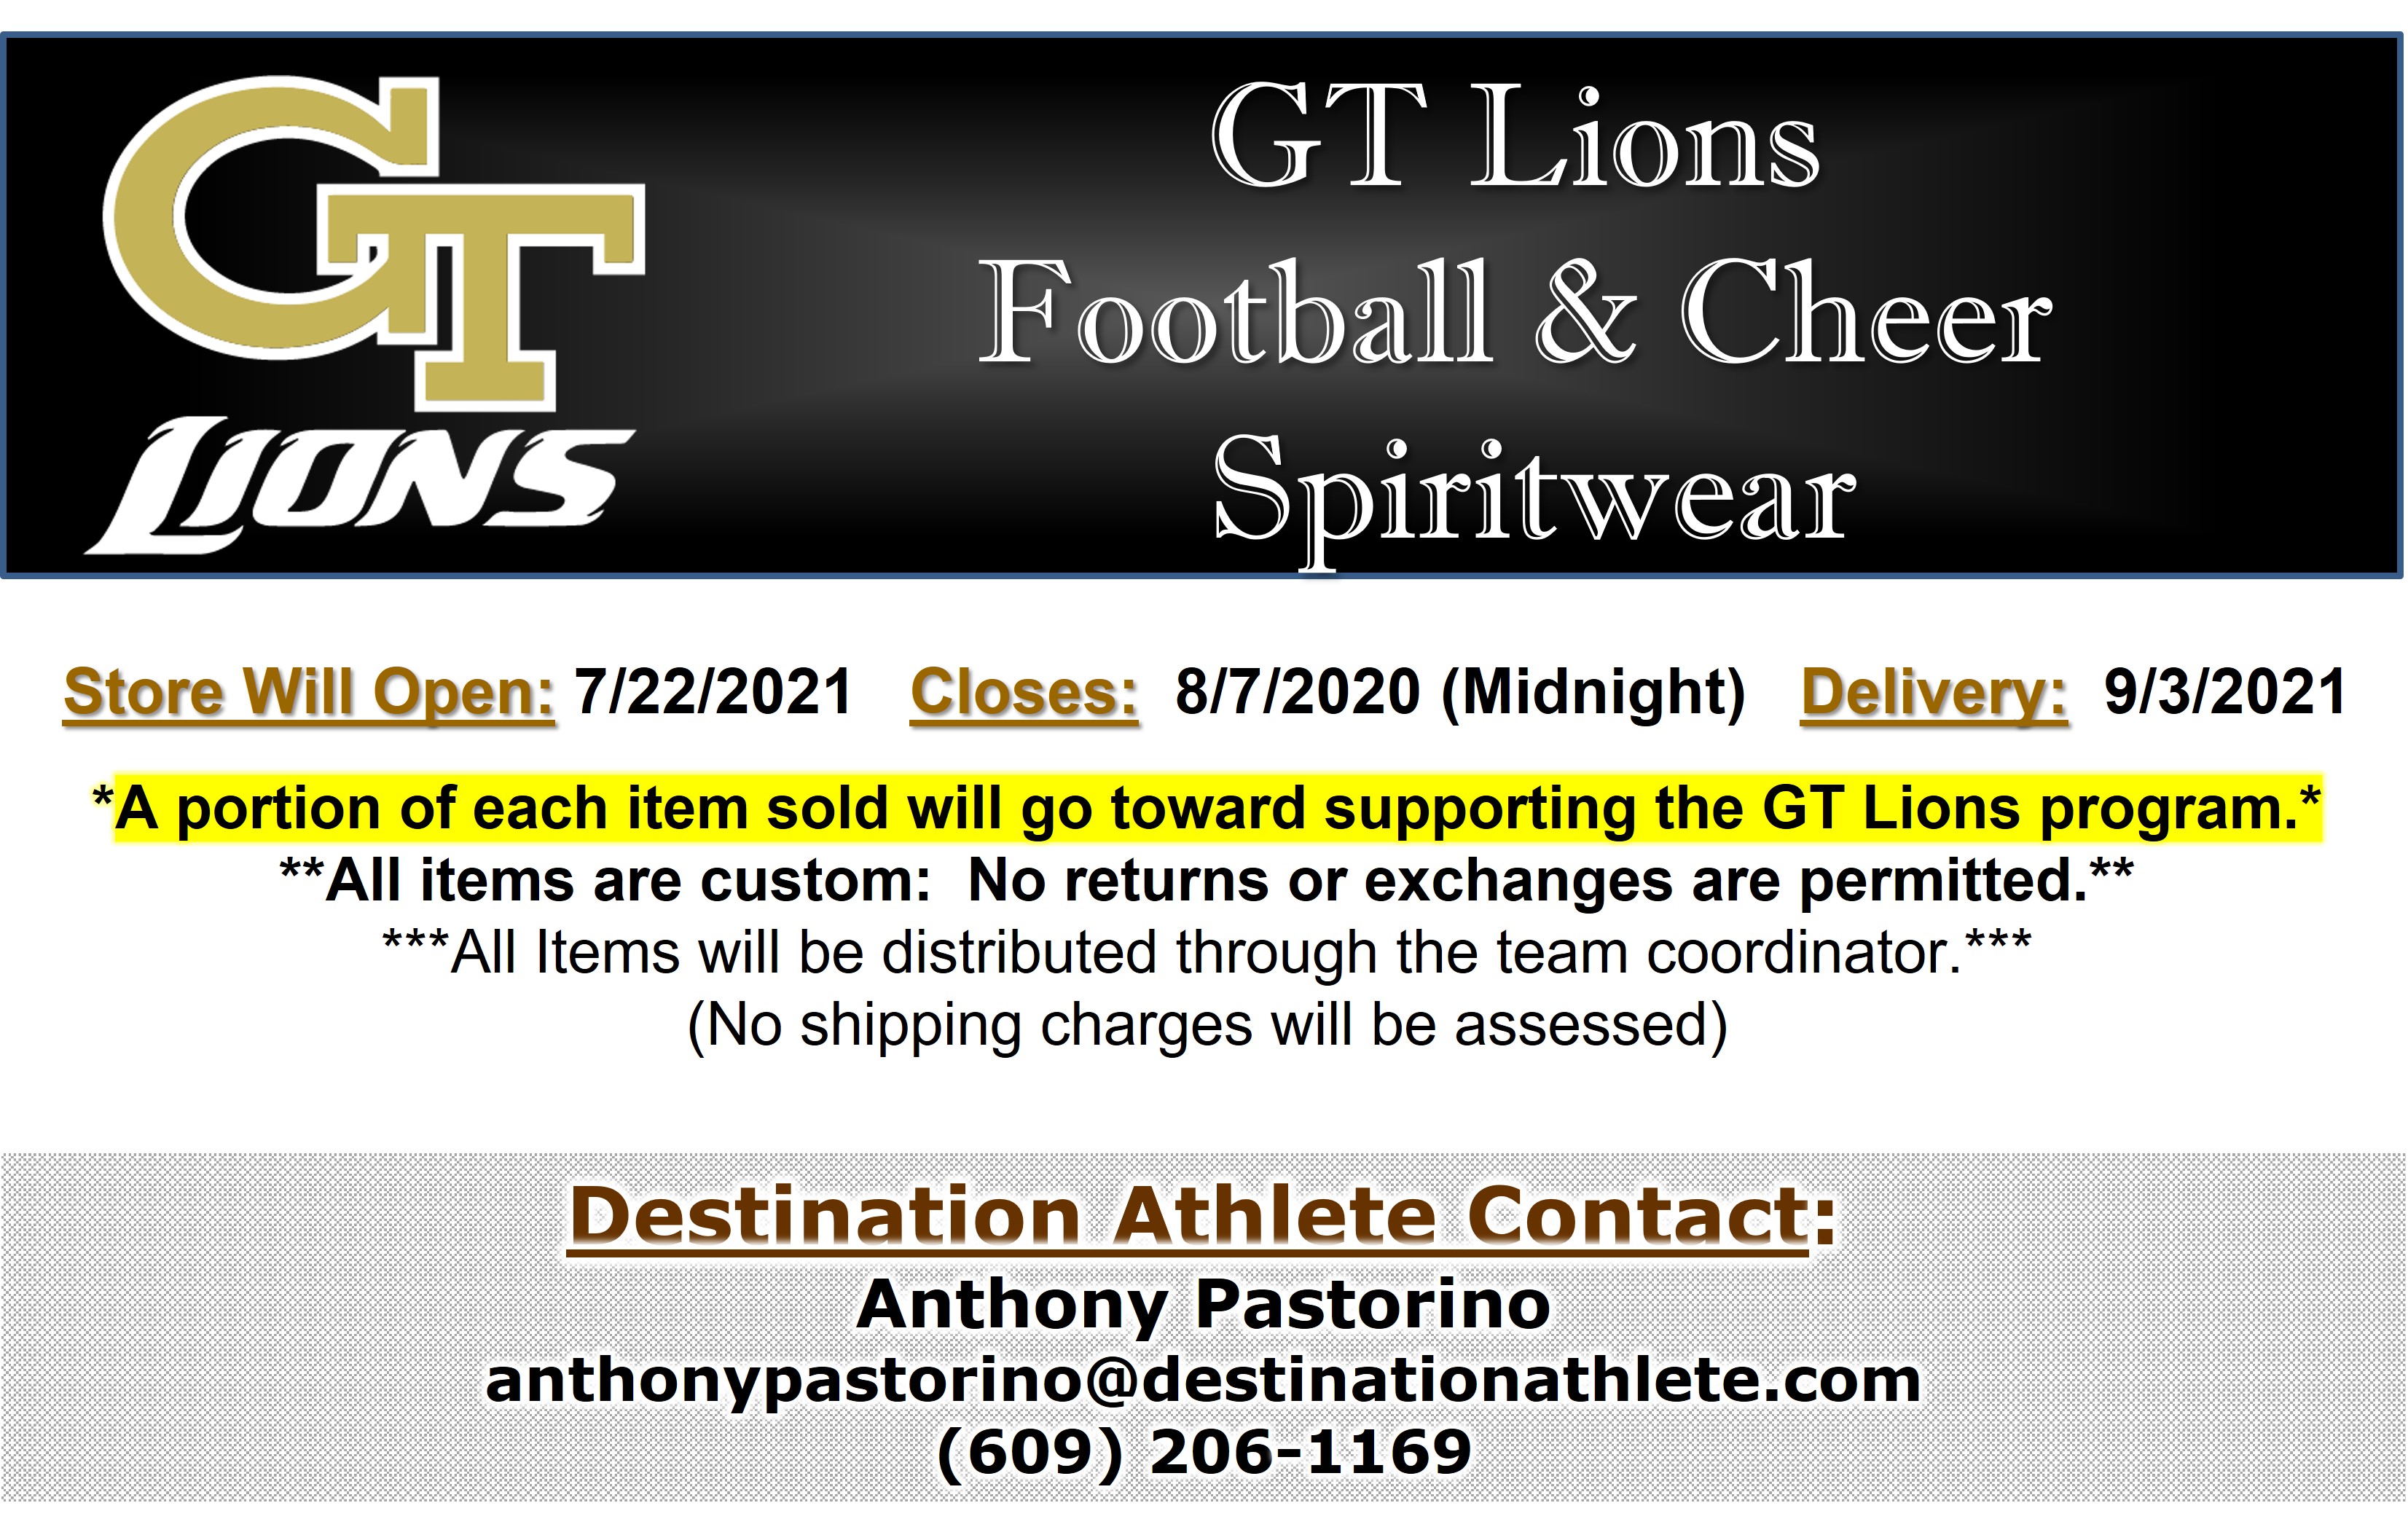 GT Lions Football and Cheer